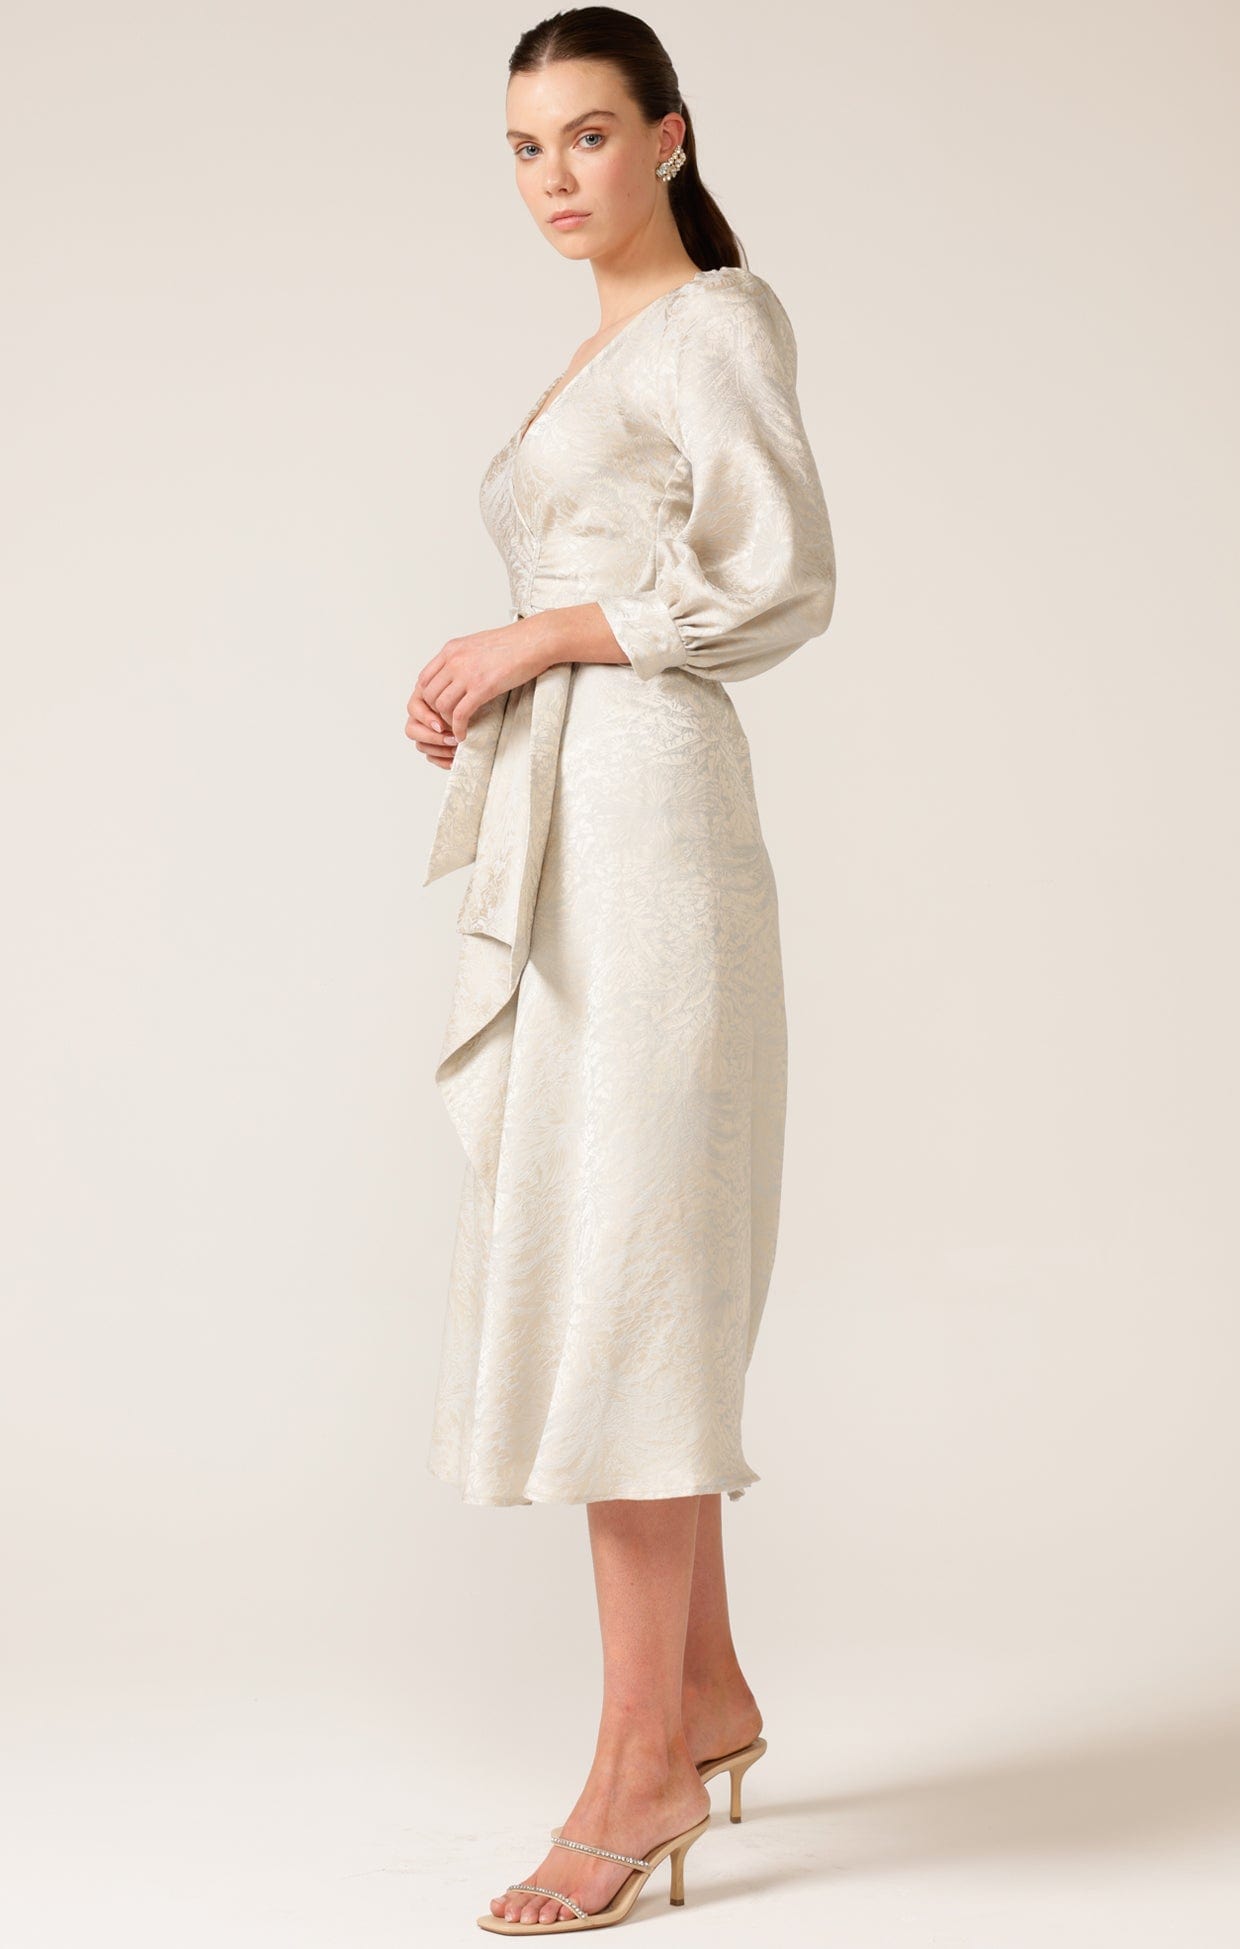 Dresses Events VERSAILLES WRAP DRESS IN OYSTER JACQUARD